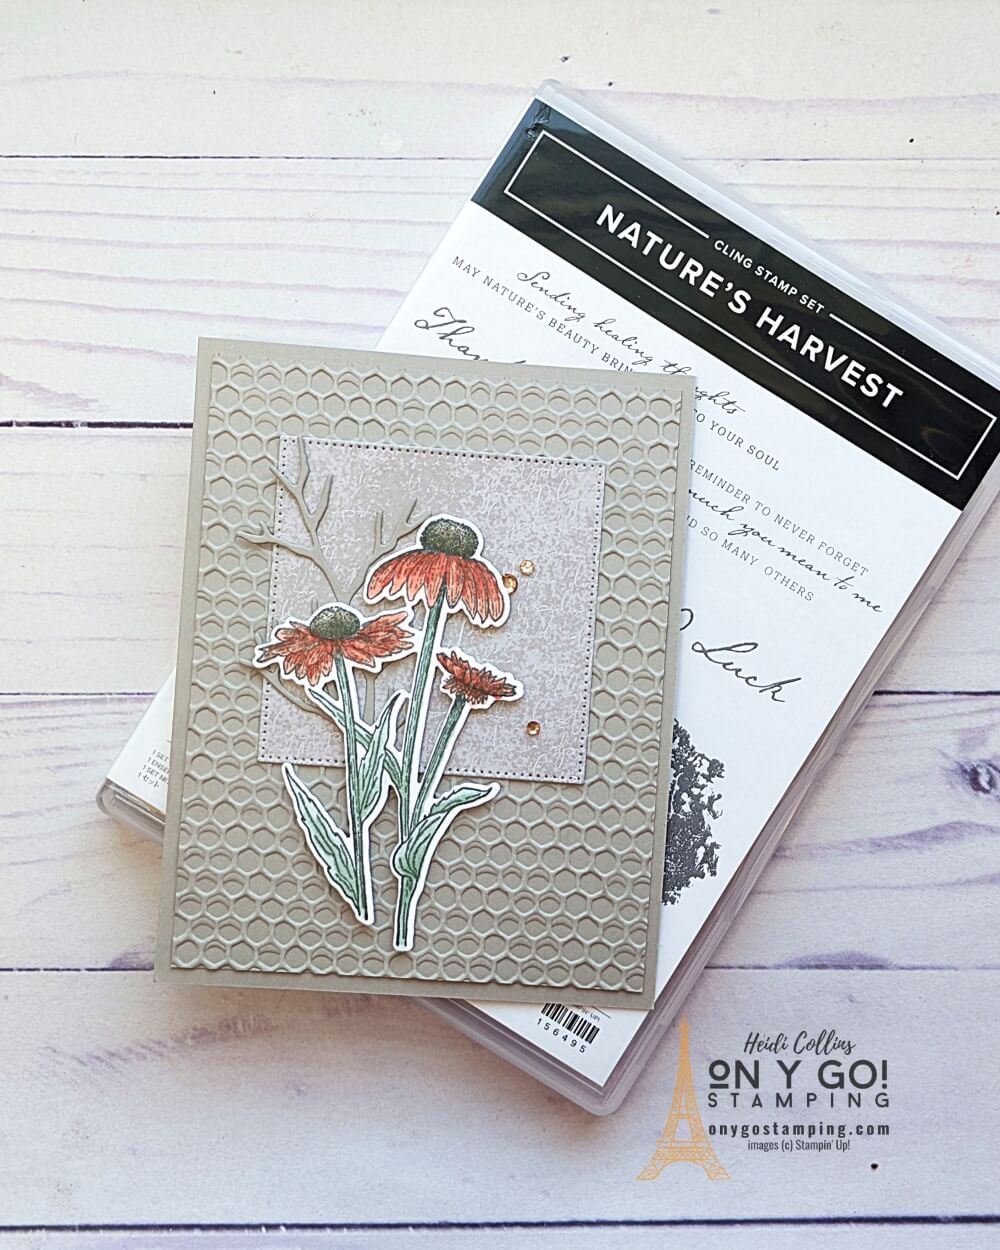 Beautifully elegant fall card idea using the Nature's Harvest stamp set and coordinating Harvest dies from Stampin' Up!